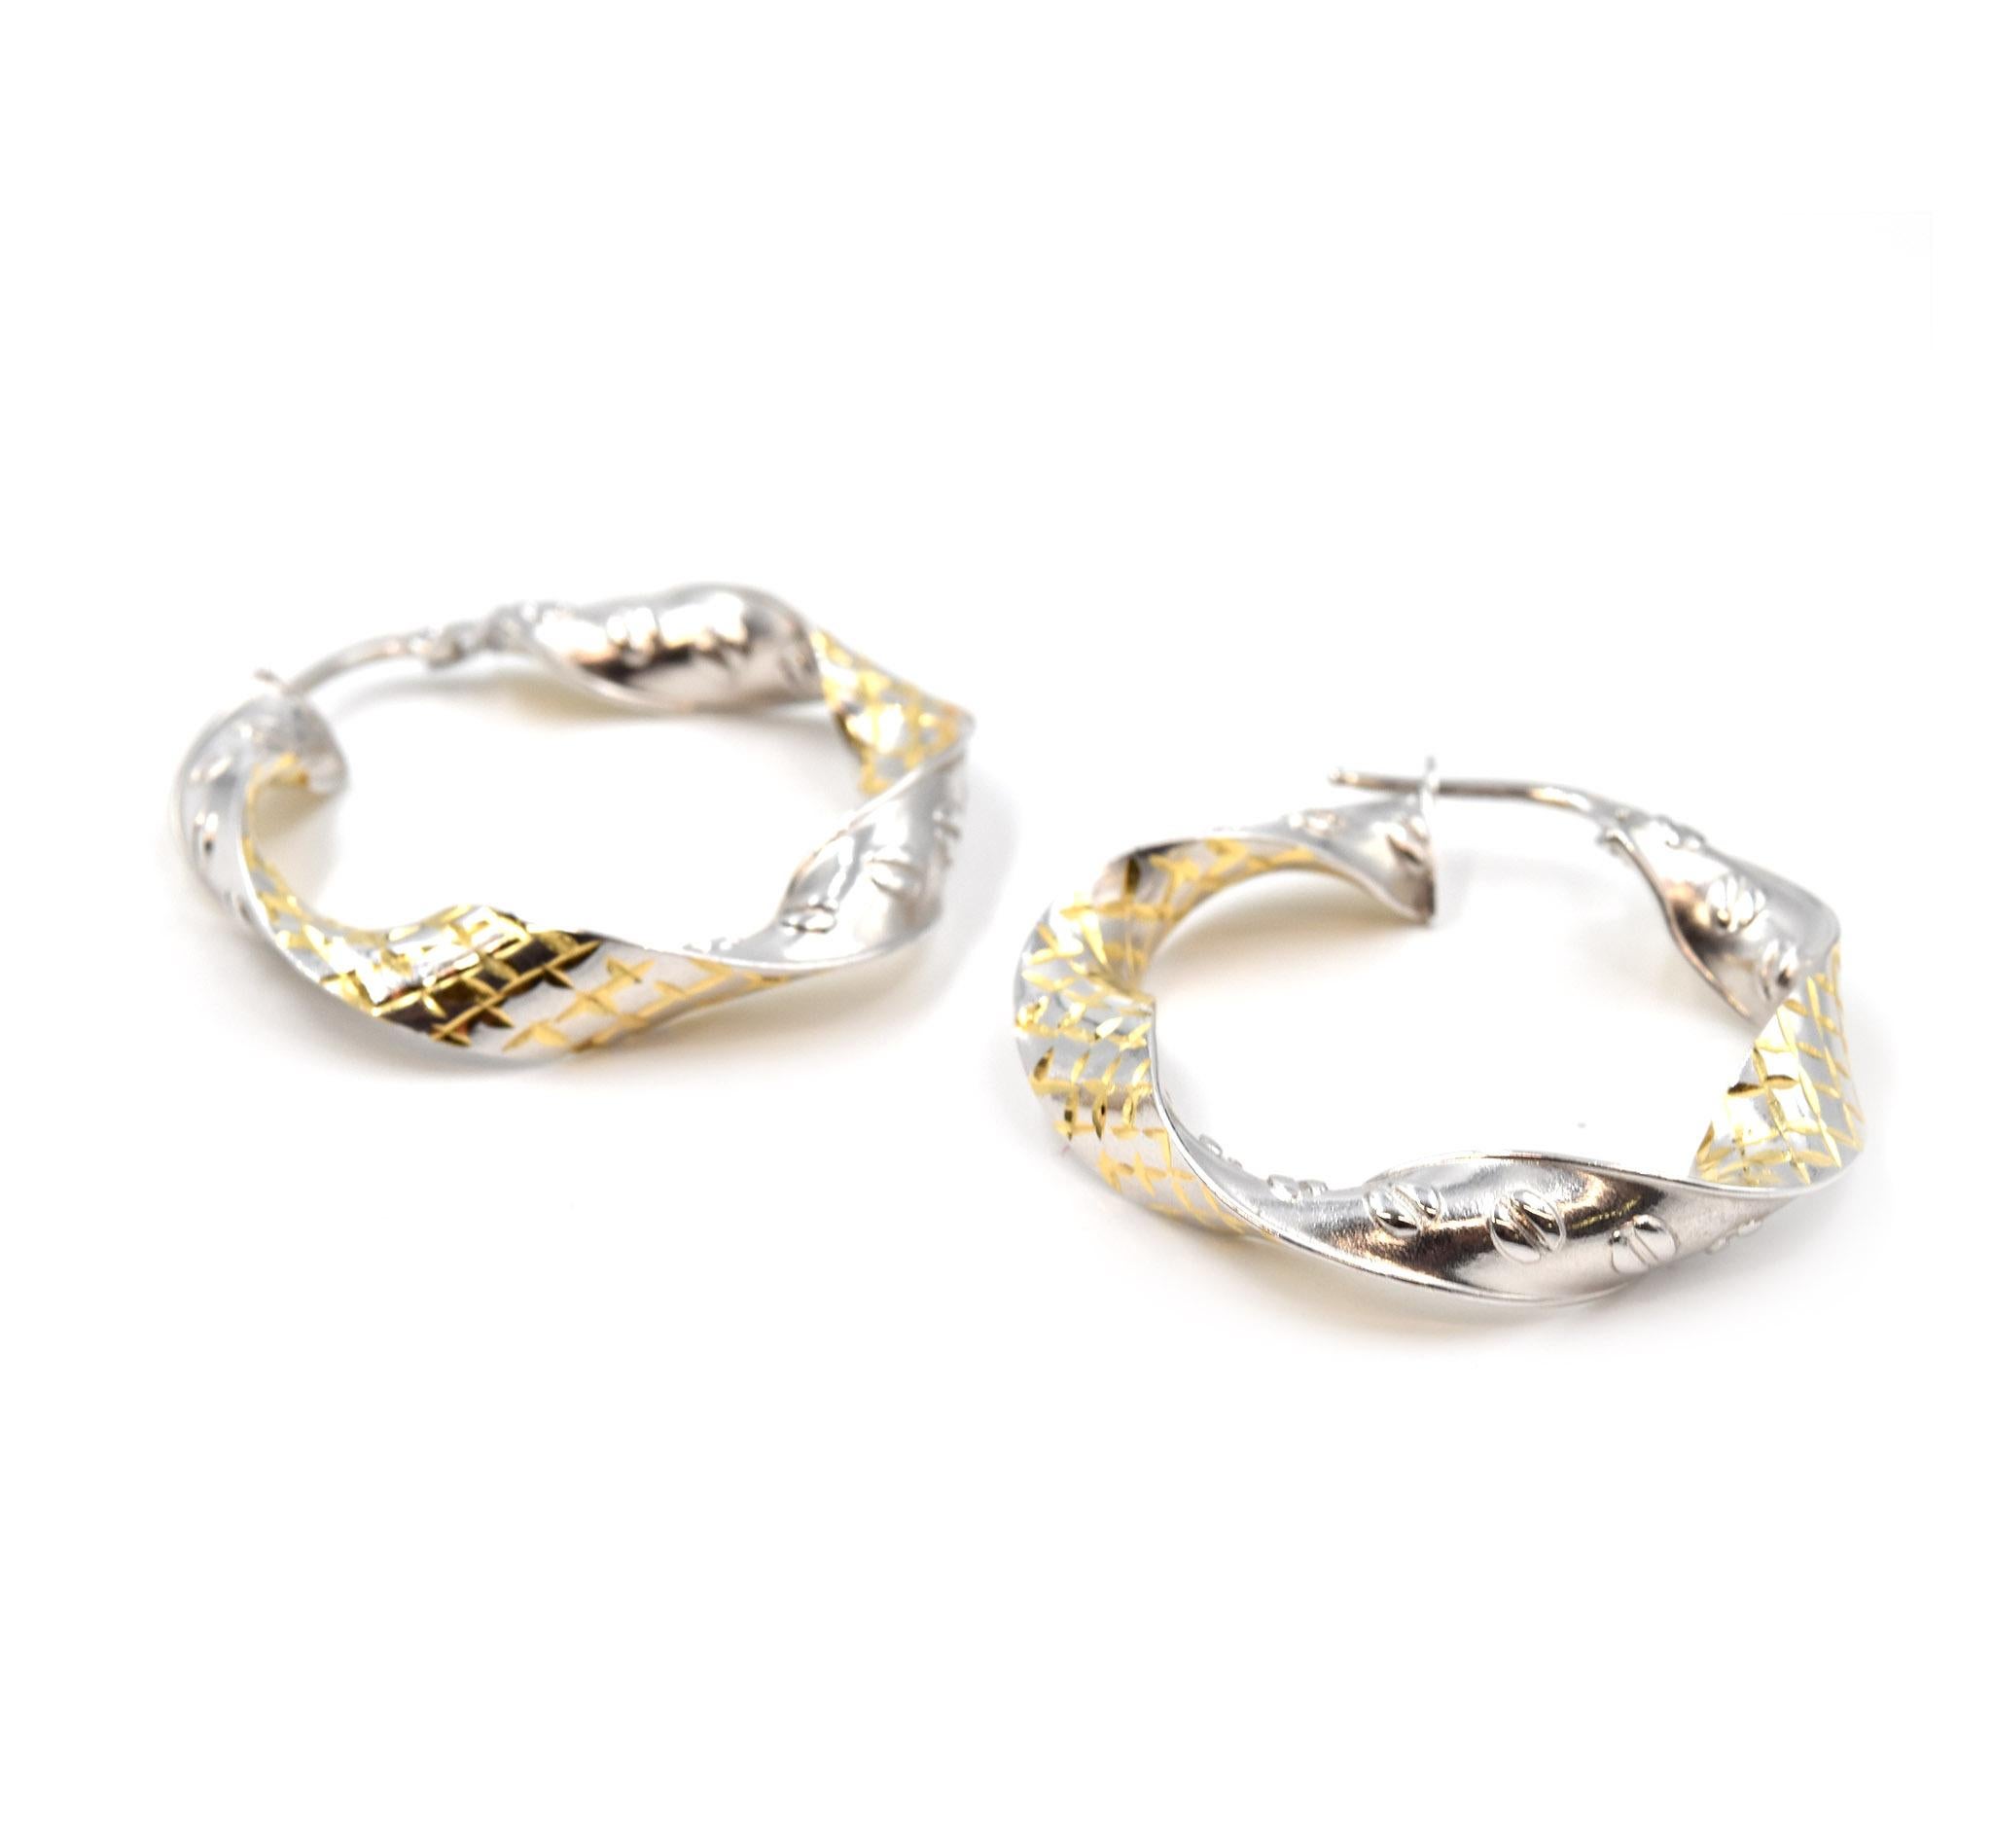 Designer: custom design
Material: 18k white & yellow gold
Fastenings: snap closure
Dimensions: each hoop is 1 1/2-inch long and 1 1/4-inch wide
Weight: 6.09 grams
